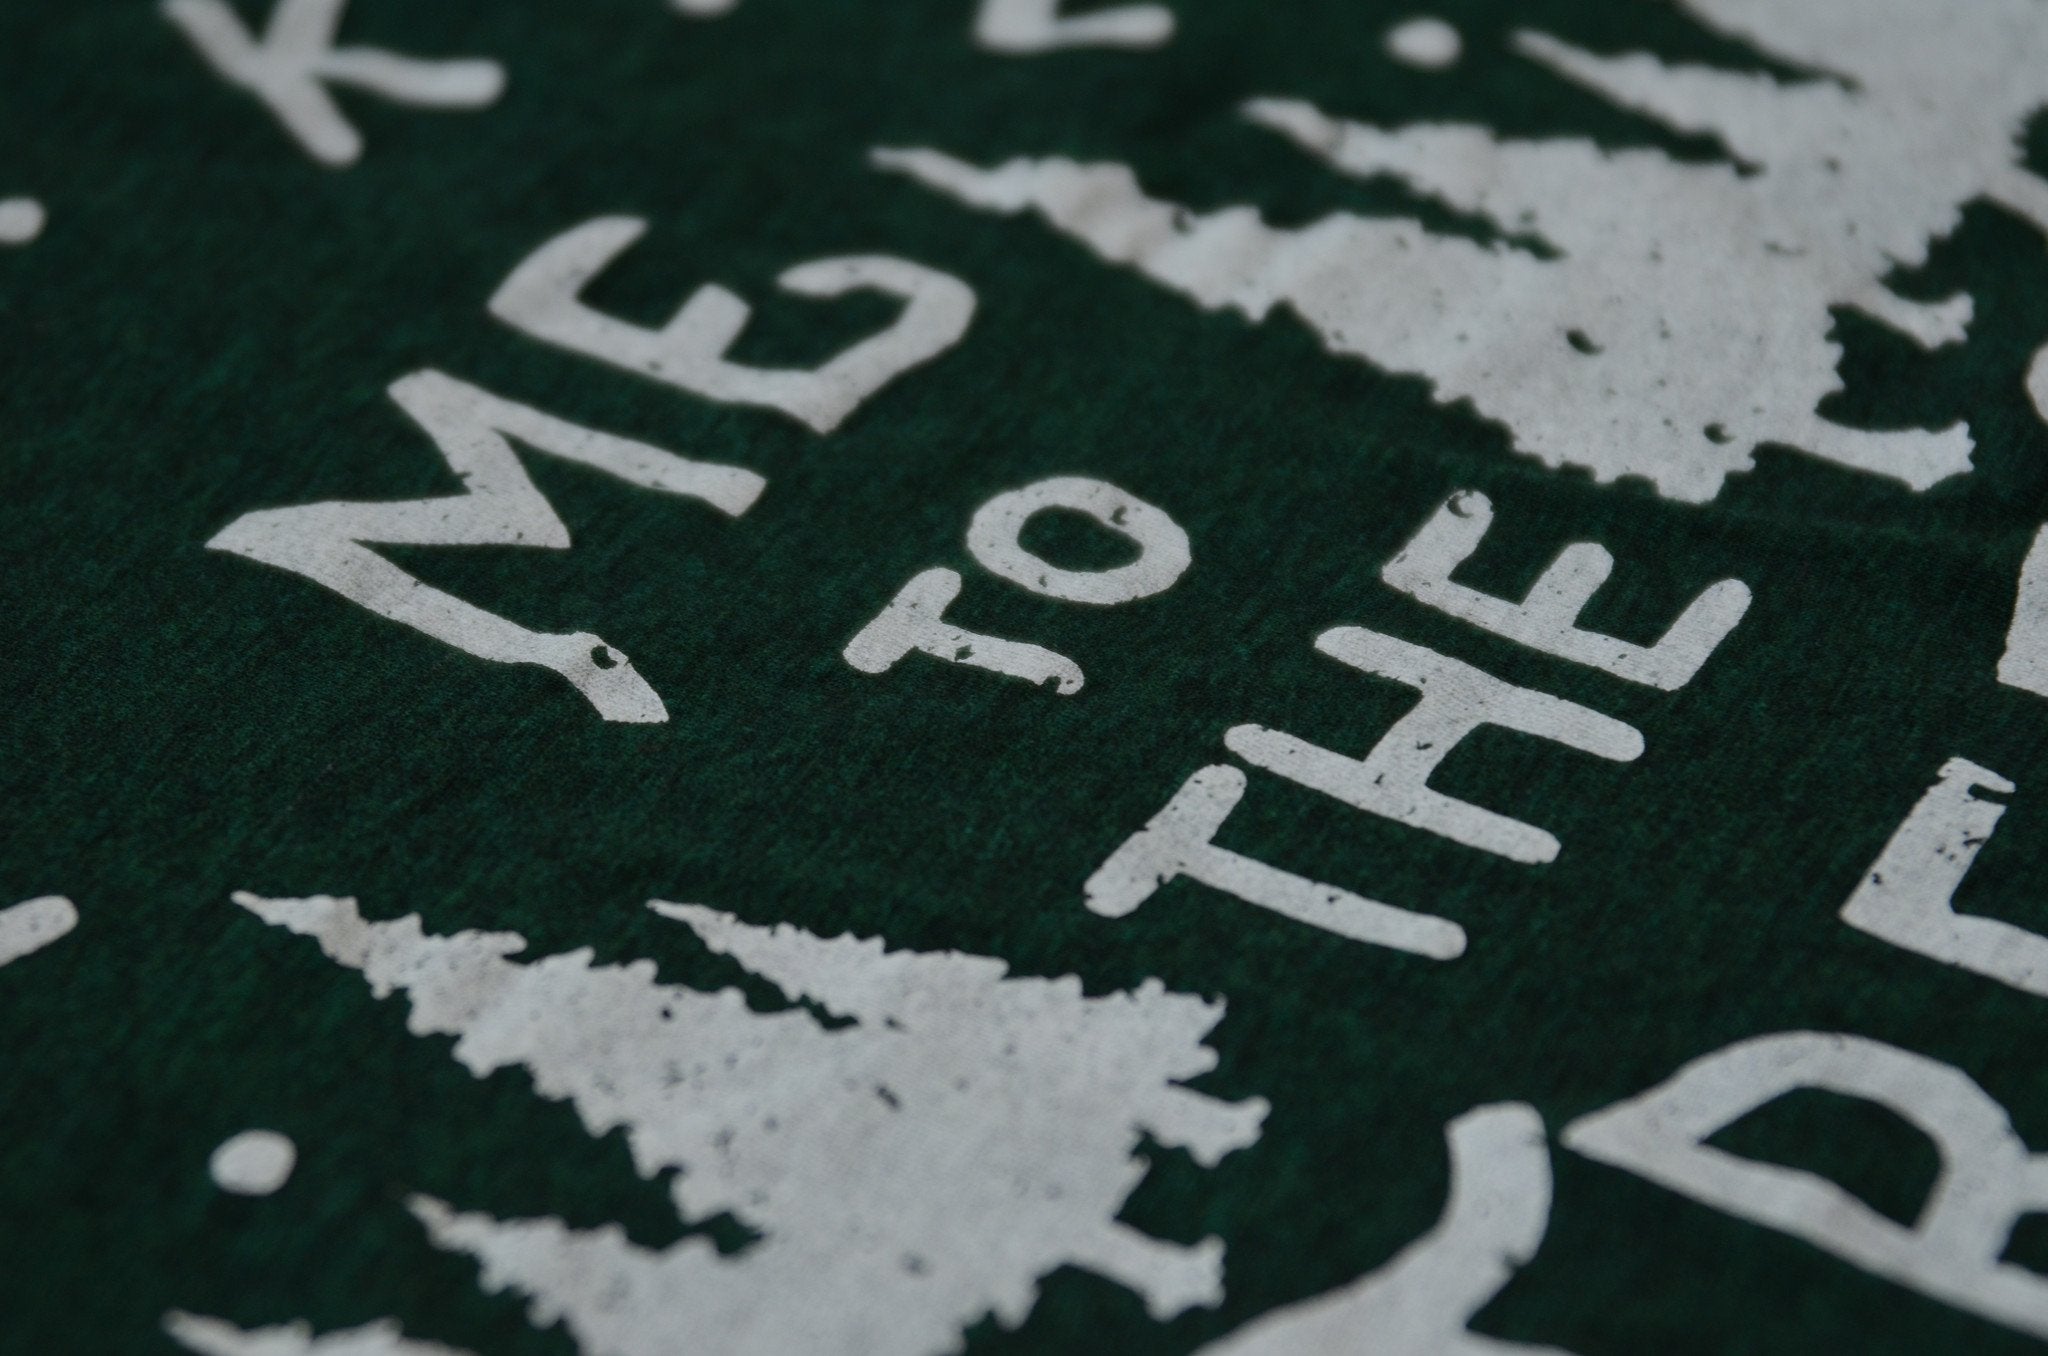 The Trees Tee-Emerald Triblend